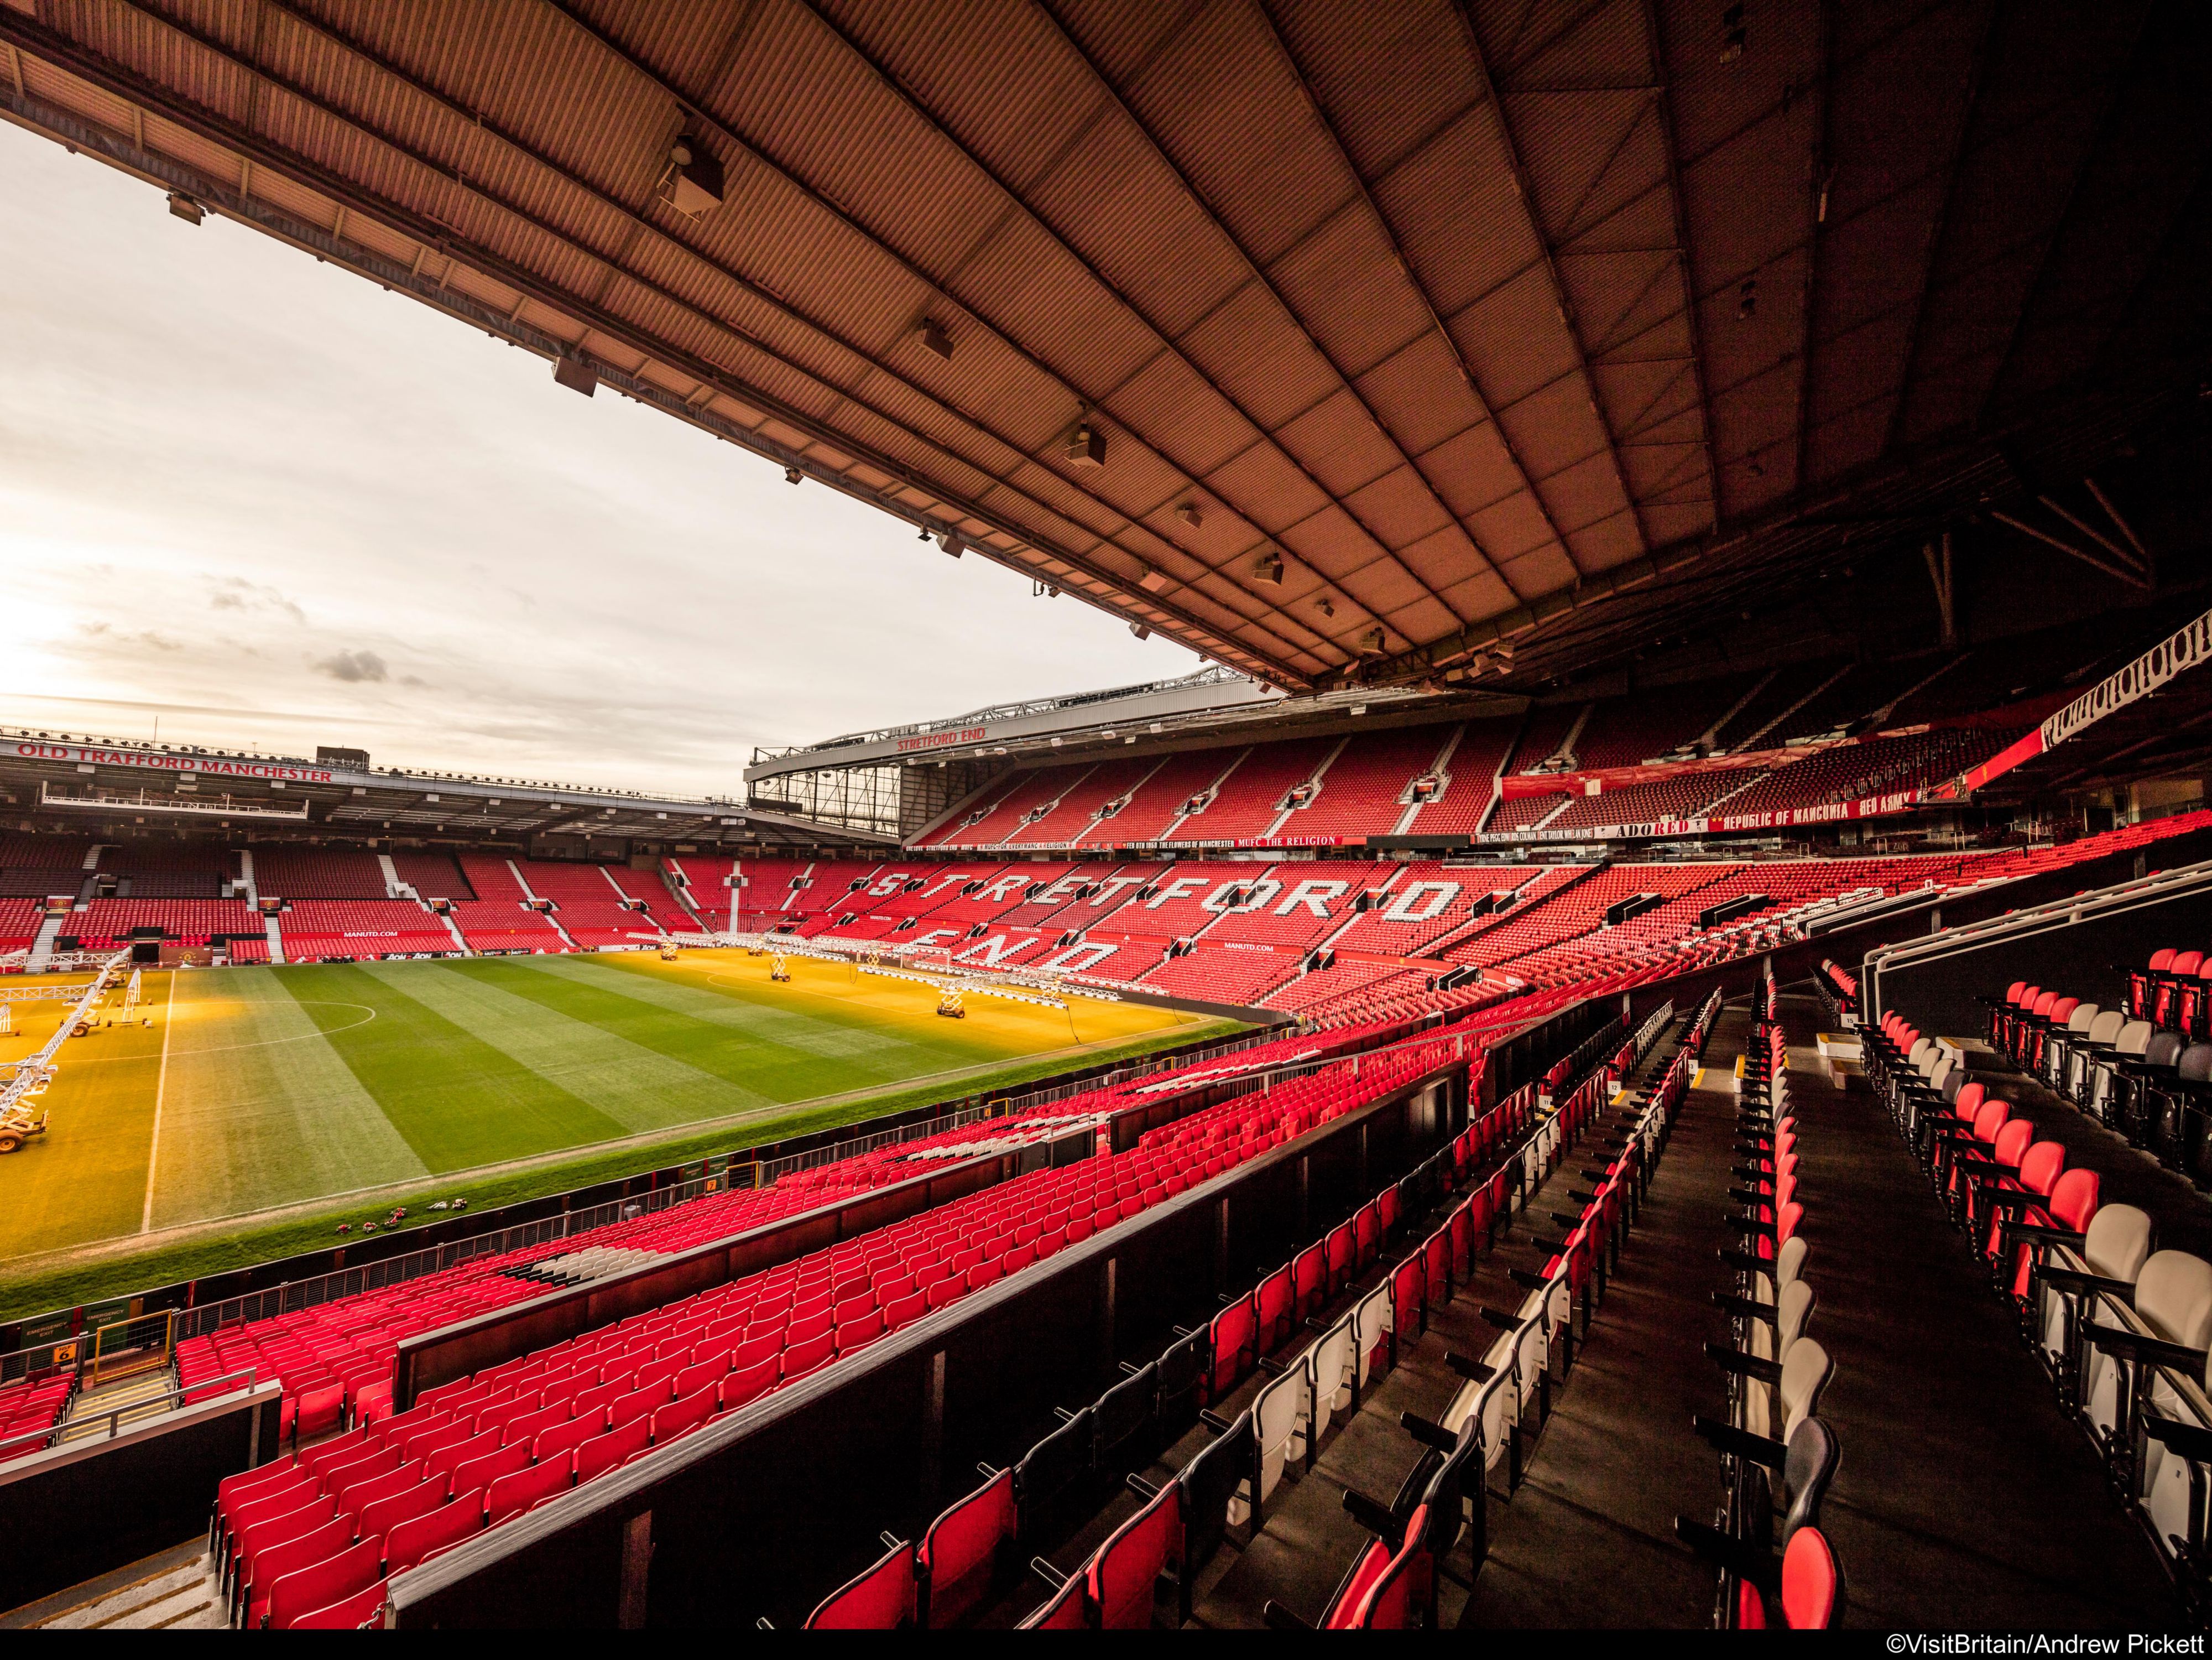 Catch the next game at Old Trafford Stadium, only 5-minutes away